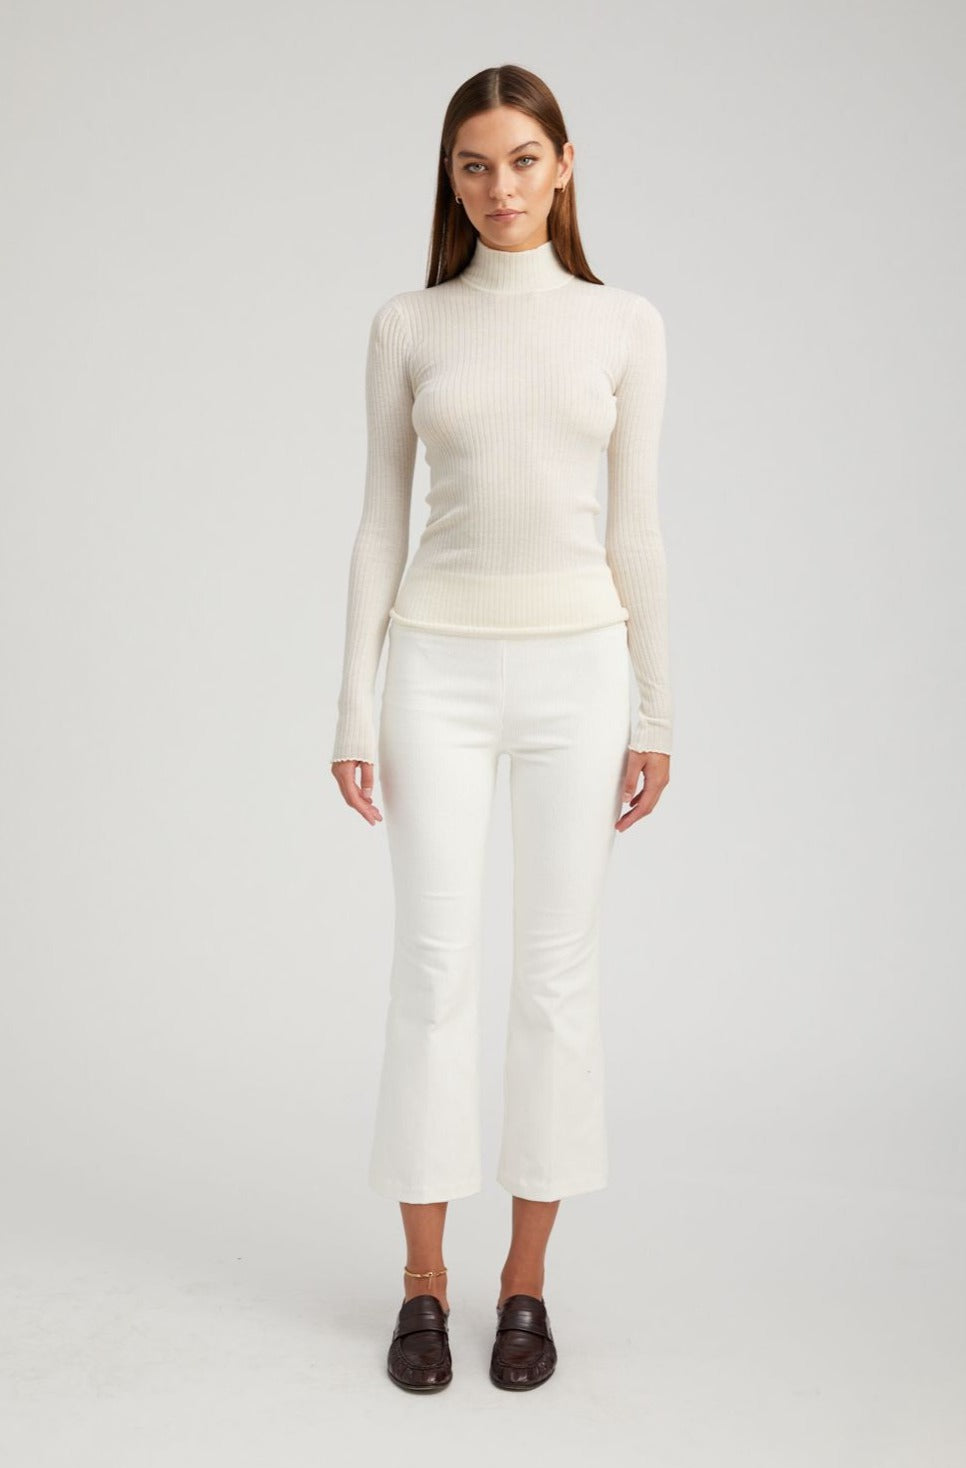 White Corduroy Ankle Flare Pants